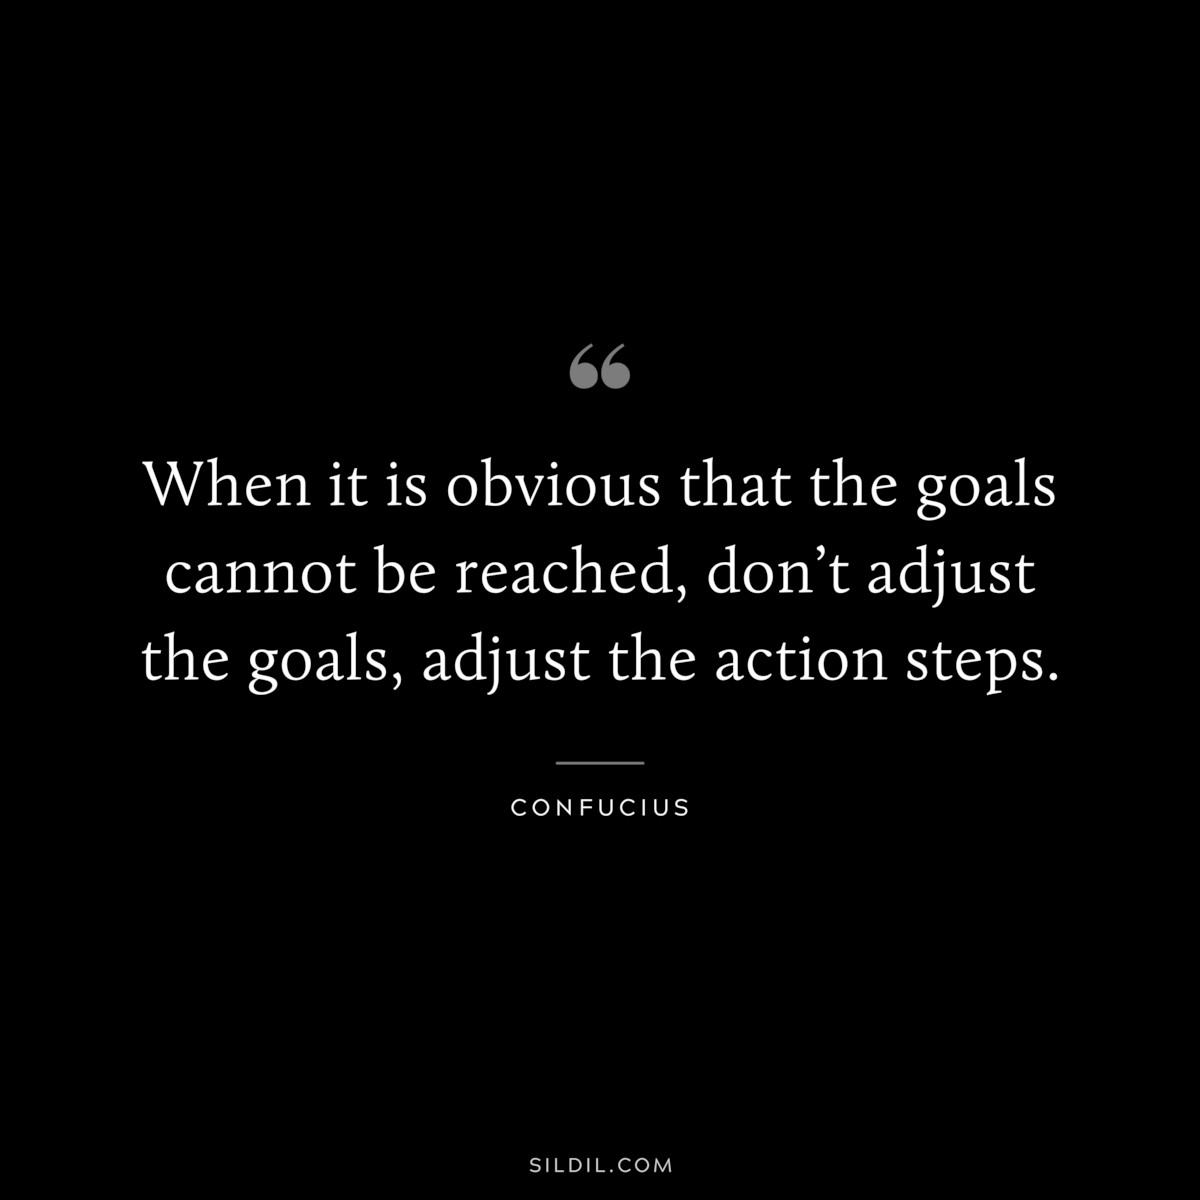 When it is obvious that the goals cannot be reached, don’t adjust the goals, adjust the action steps. ― Confucius